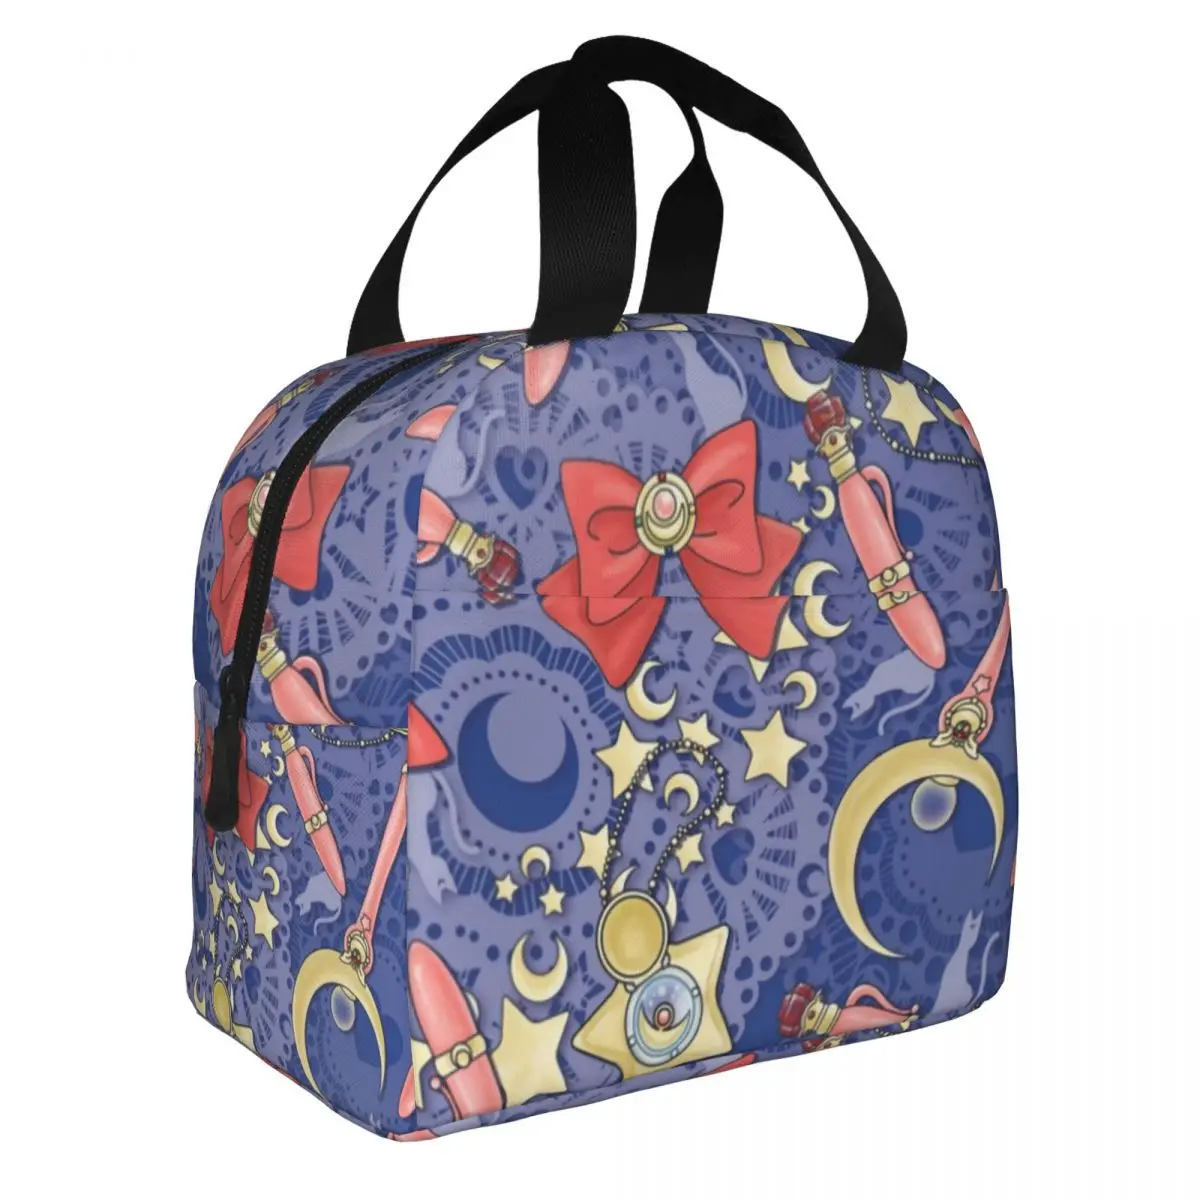 

Sailors Moon Prism Power Print Insulated Lunch Bag for Women Resuable Thermal Cooler Bento Box Kids School Children Food Bags